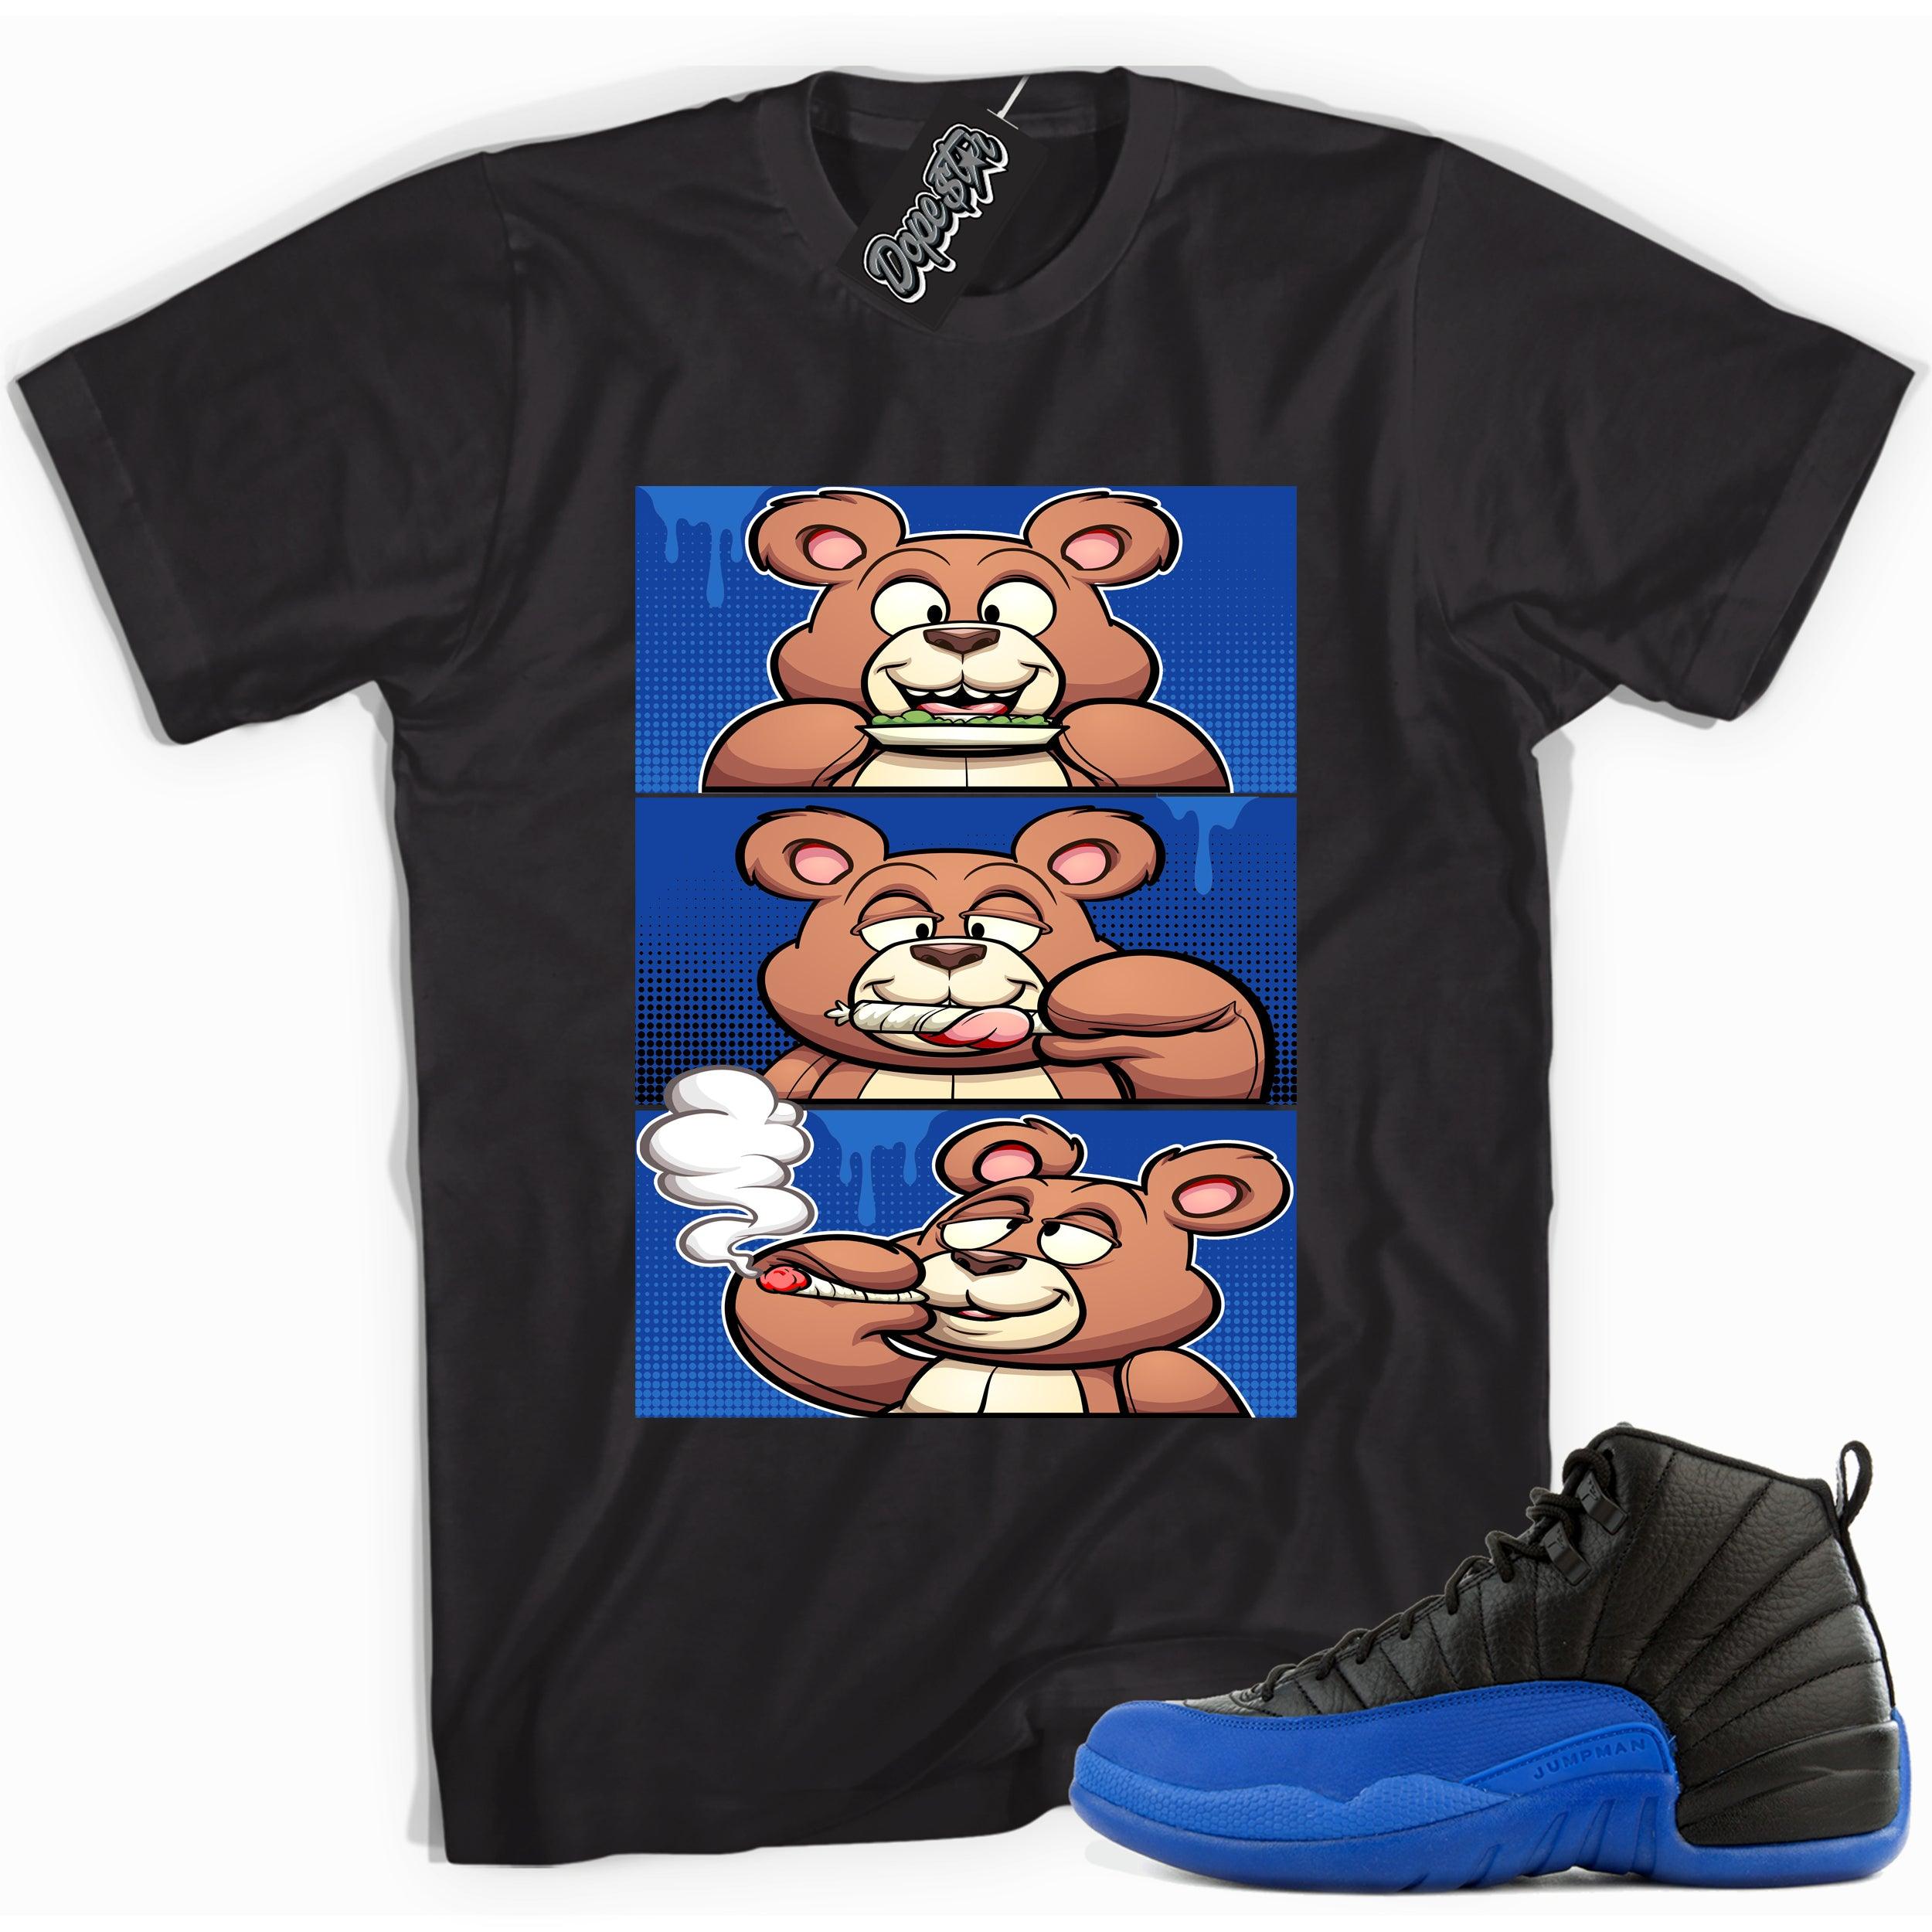 Cool black graphic tee with 'roll it lick it smoke it bear' print, that perfectly matches  Air Jordan 12 Retro Black Game Royal sneakers.